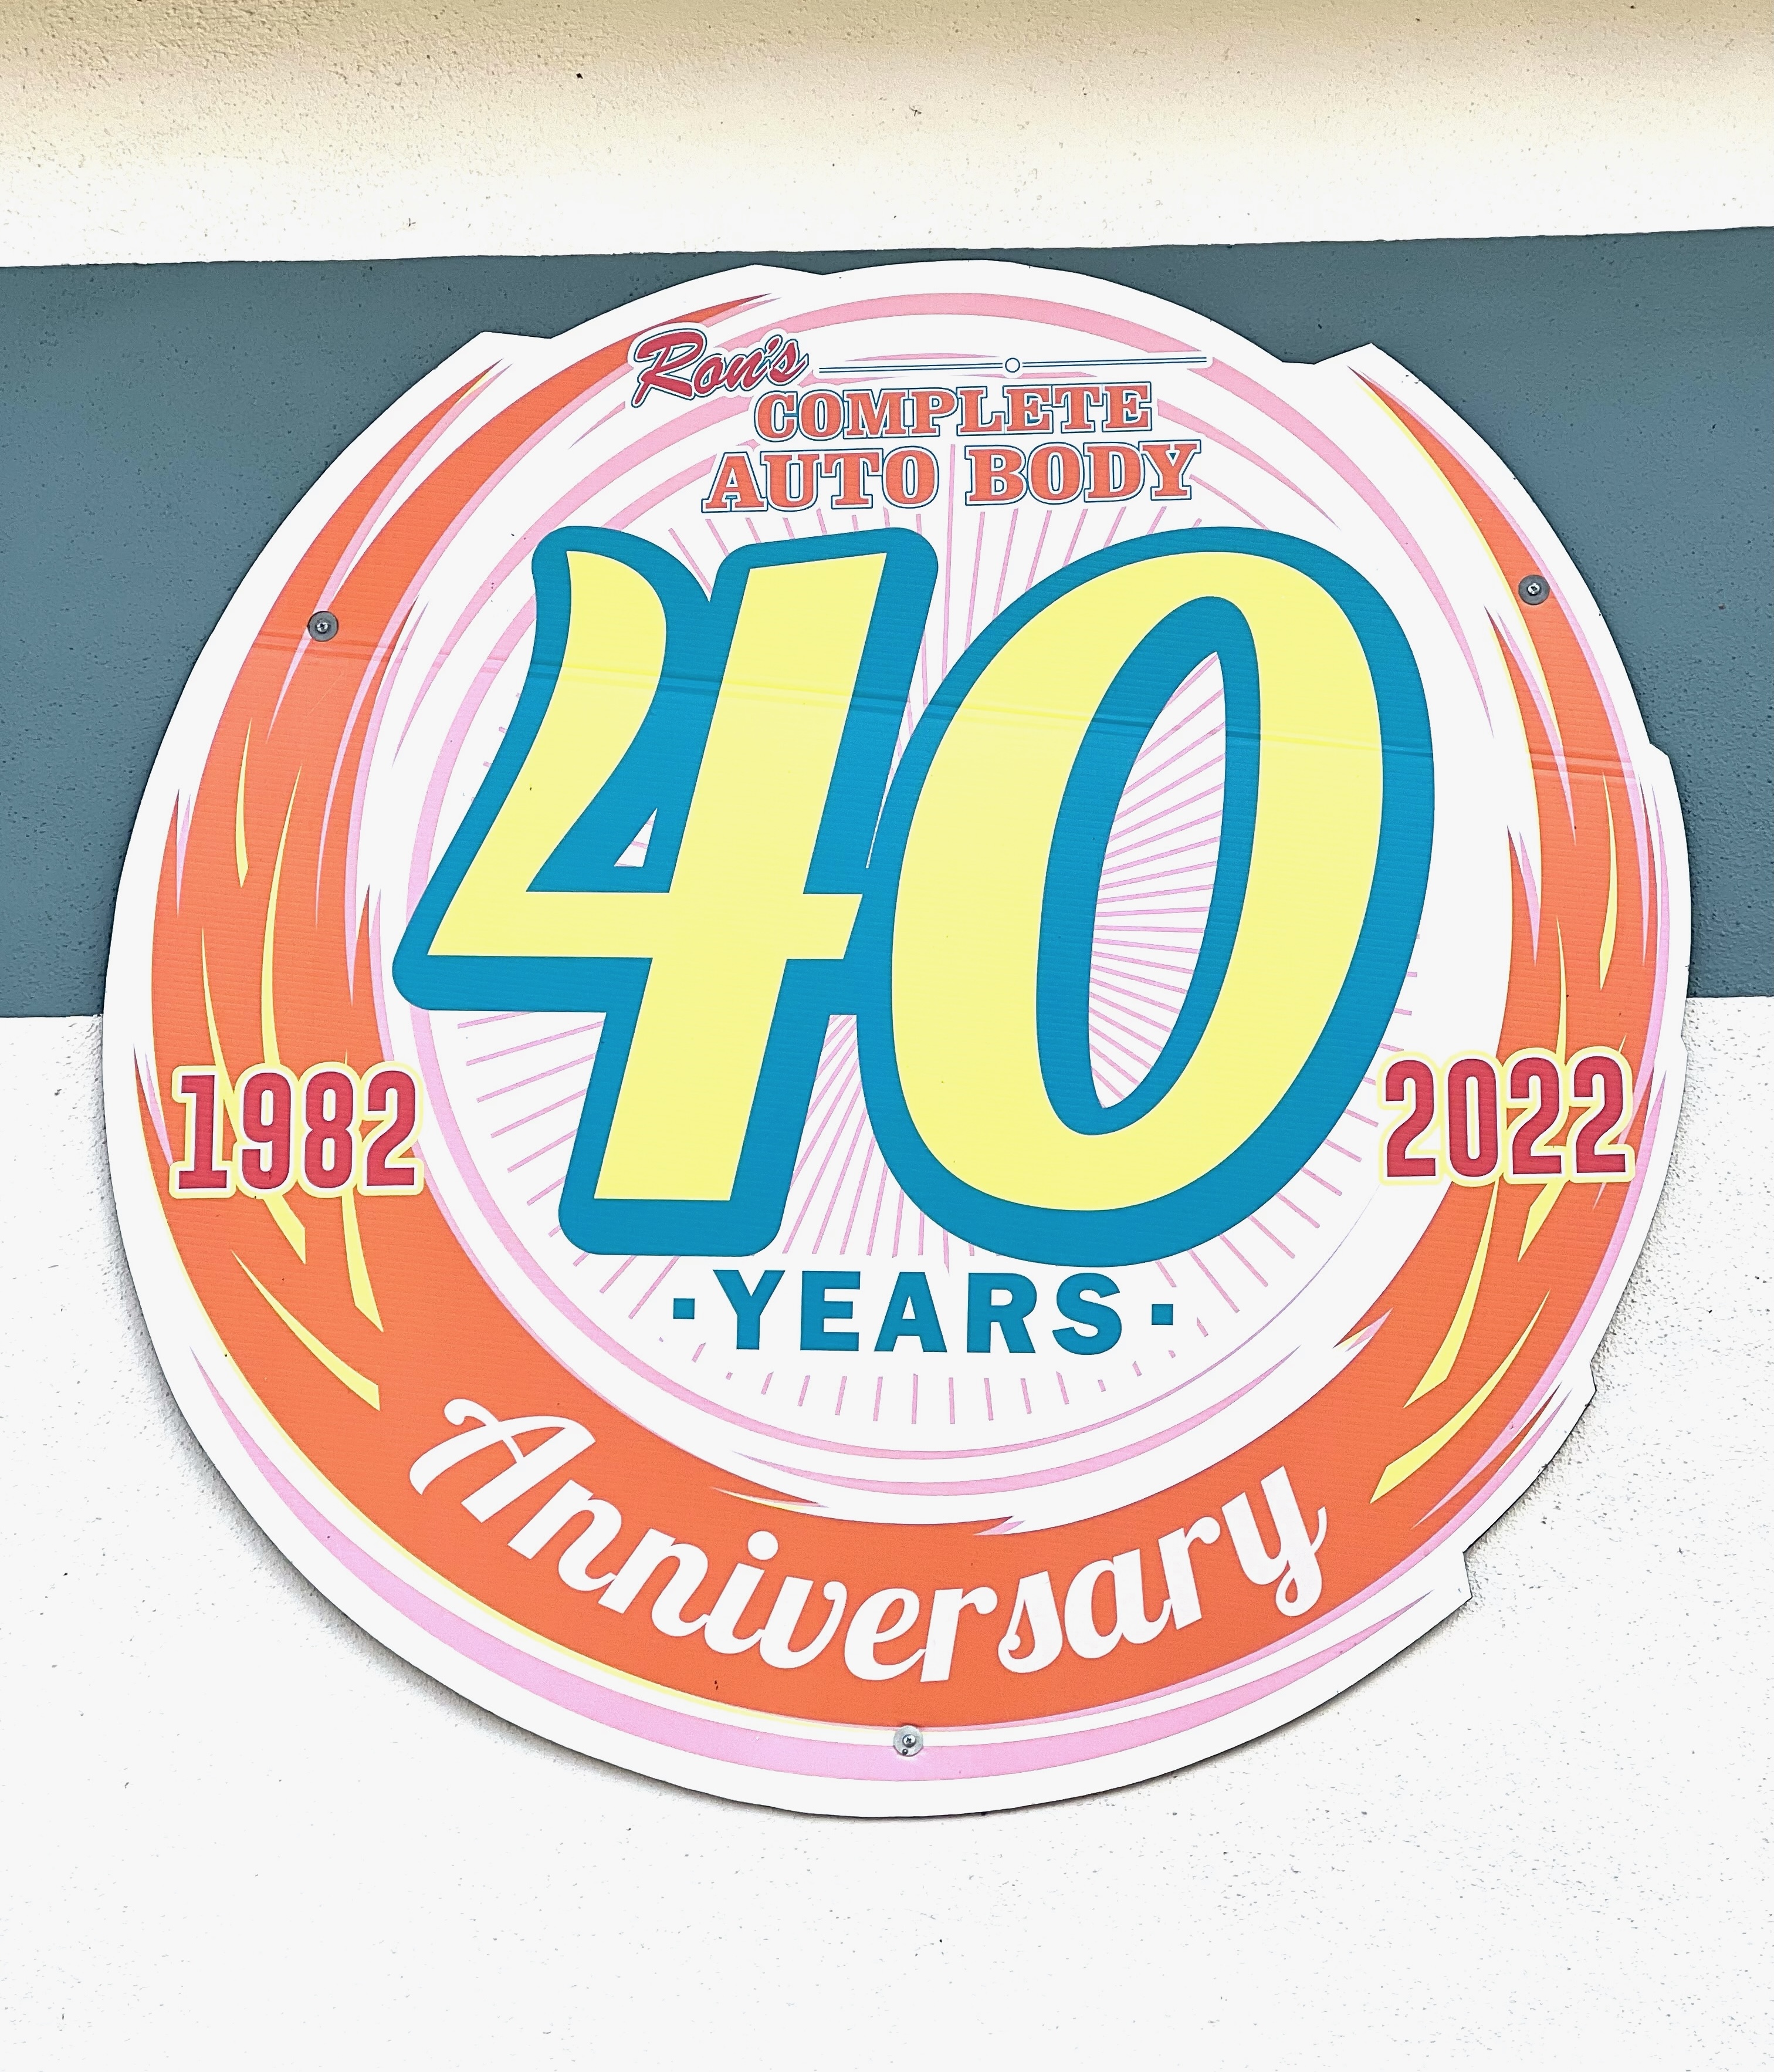 40-year anniversary badge for Ron's Complete Auto Body